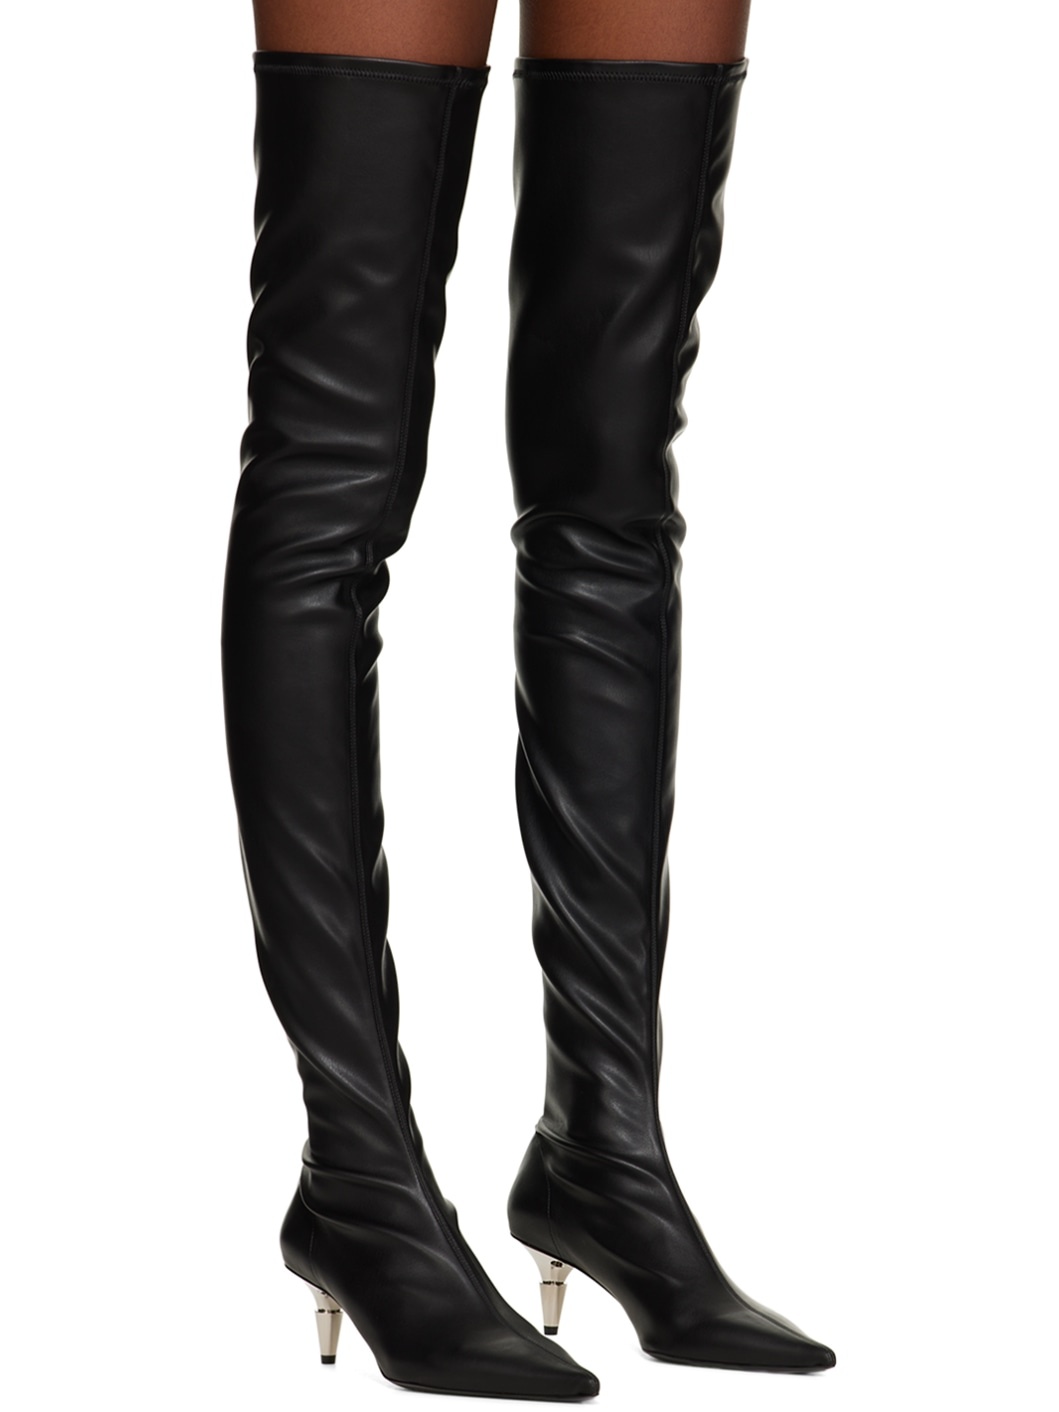 Black Spike Over-The-Knee Boots - 4